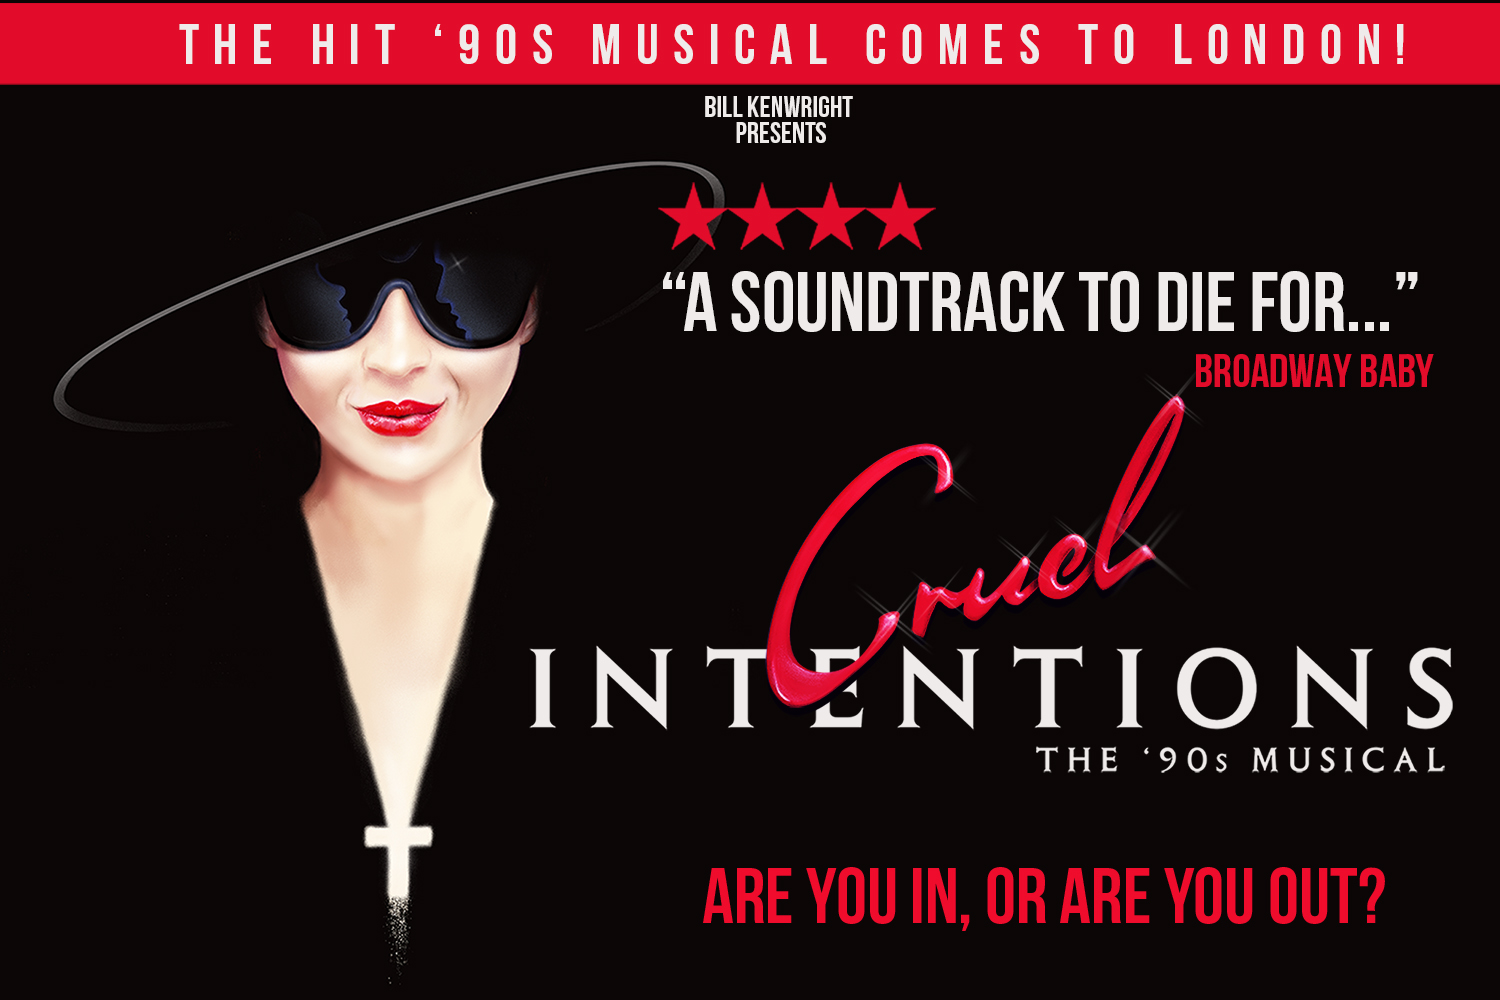 Cruel Intentions the 90s musical